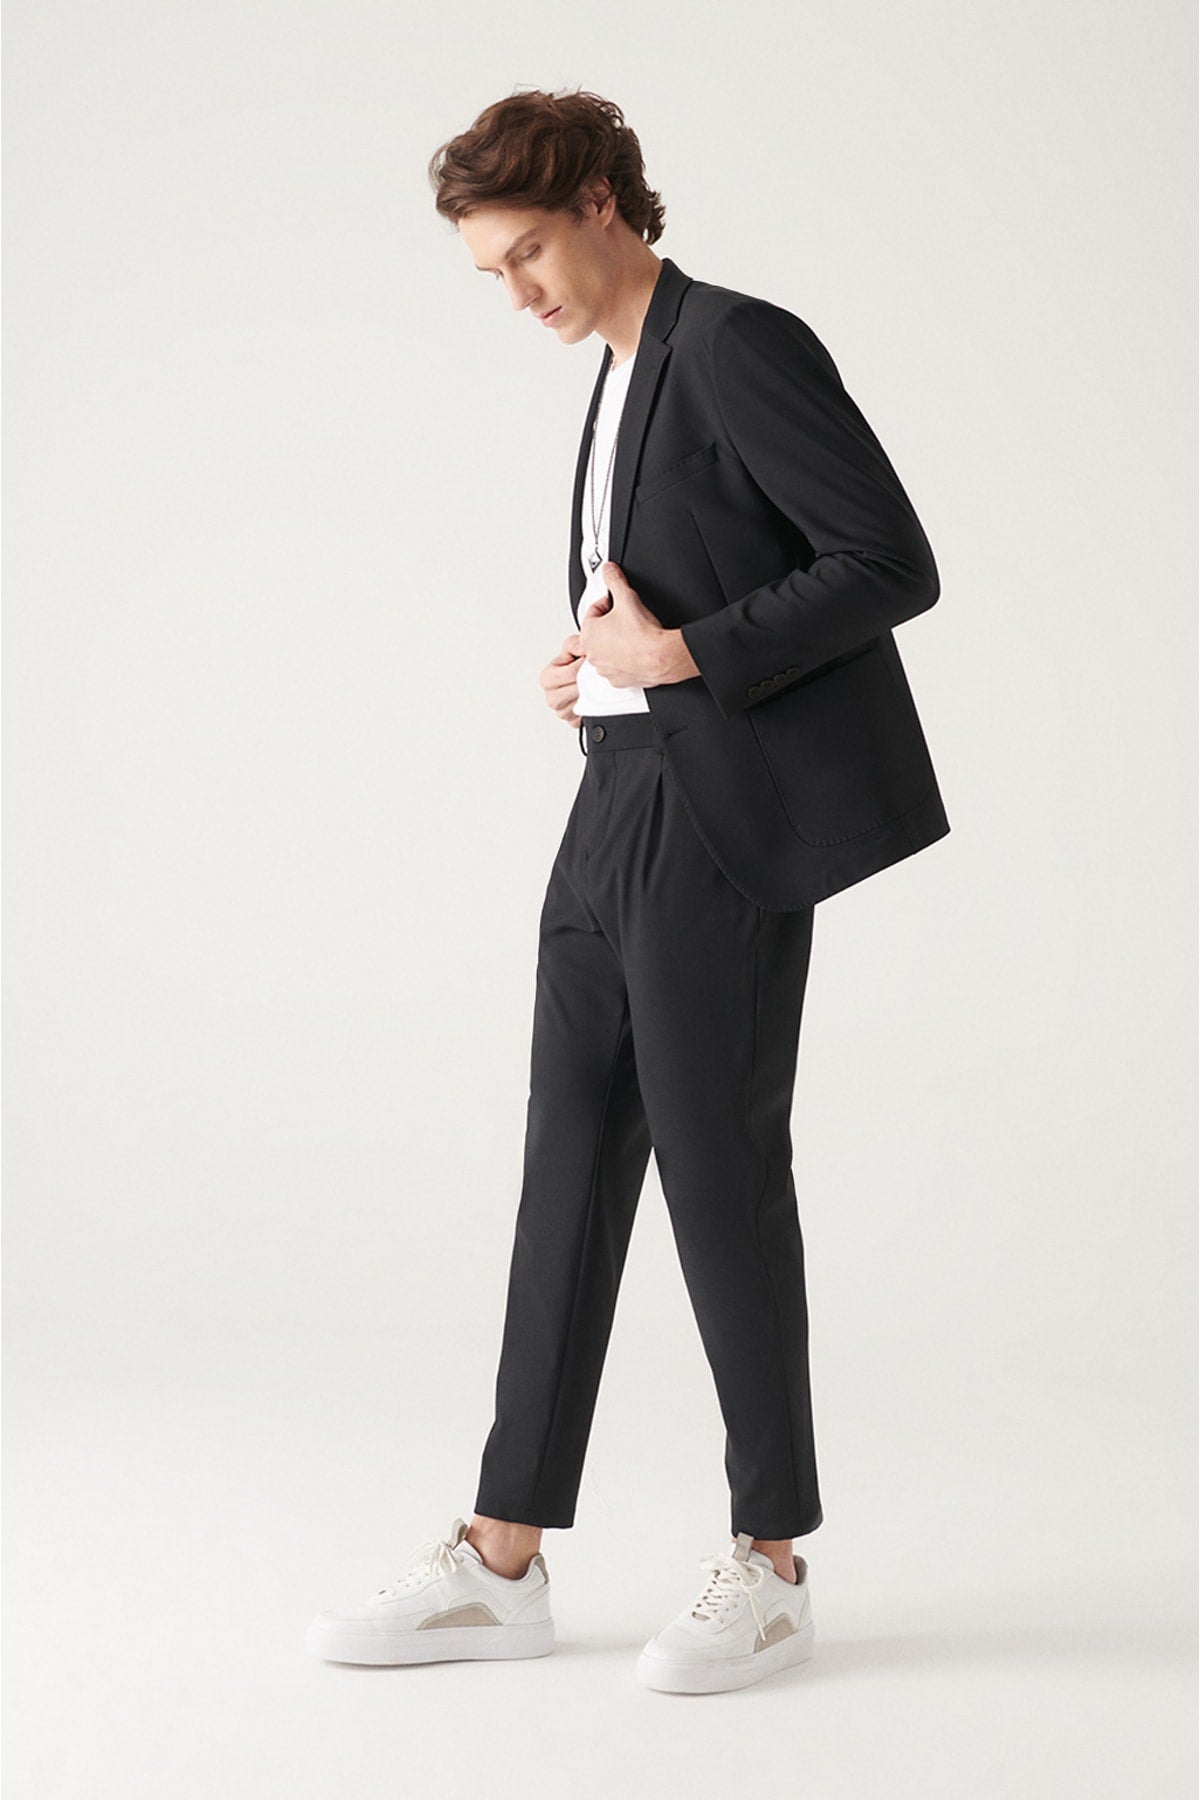 Men's black water repulsive fabric relaxed fit suit pants A22y3007